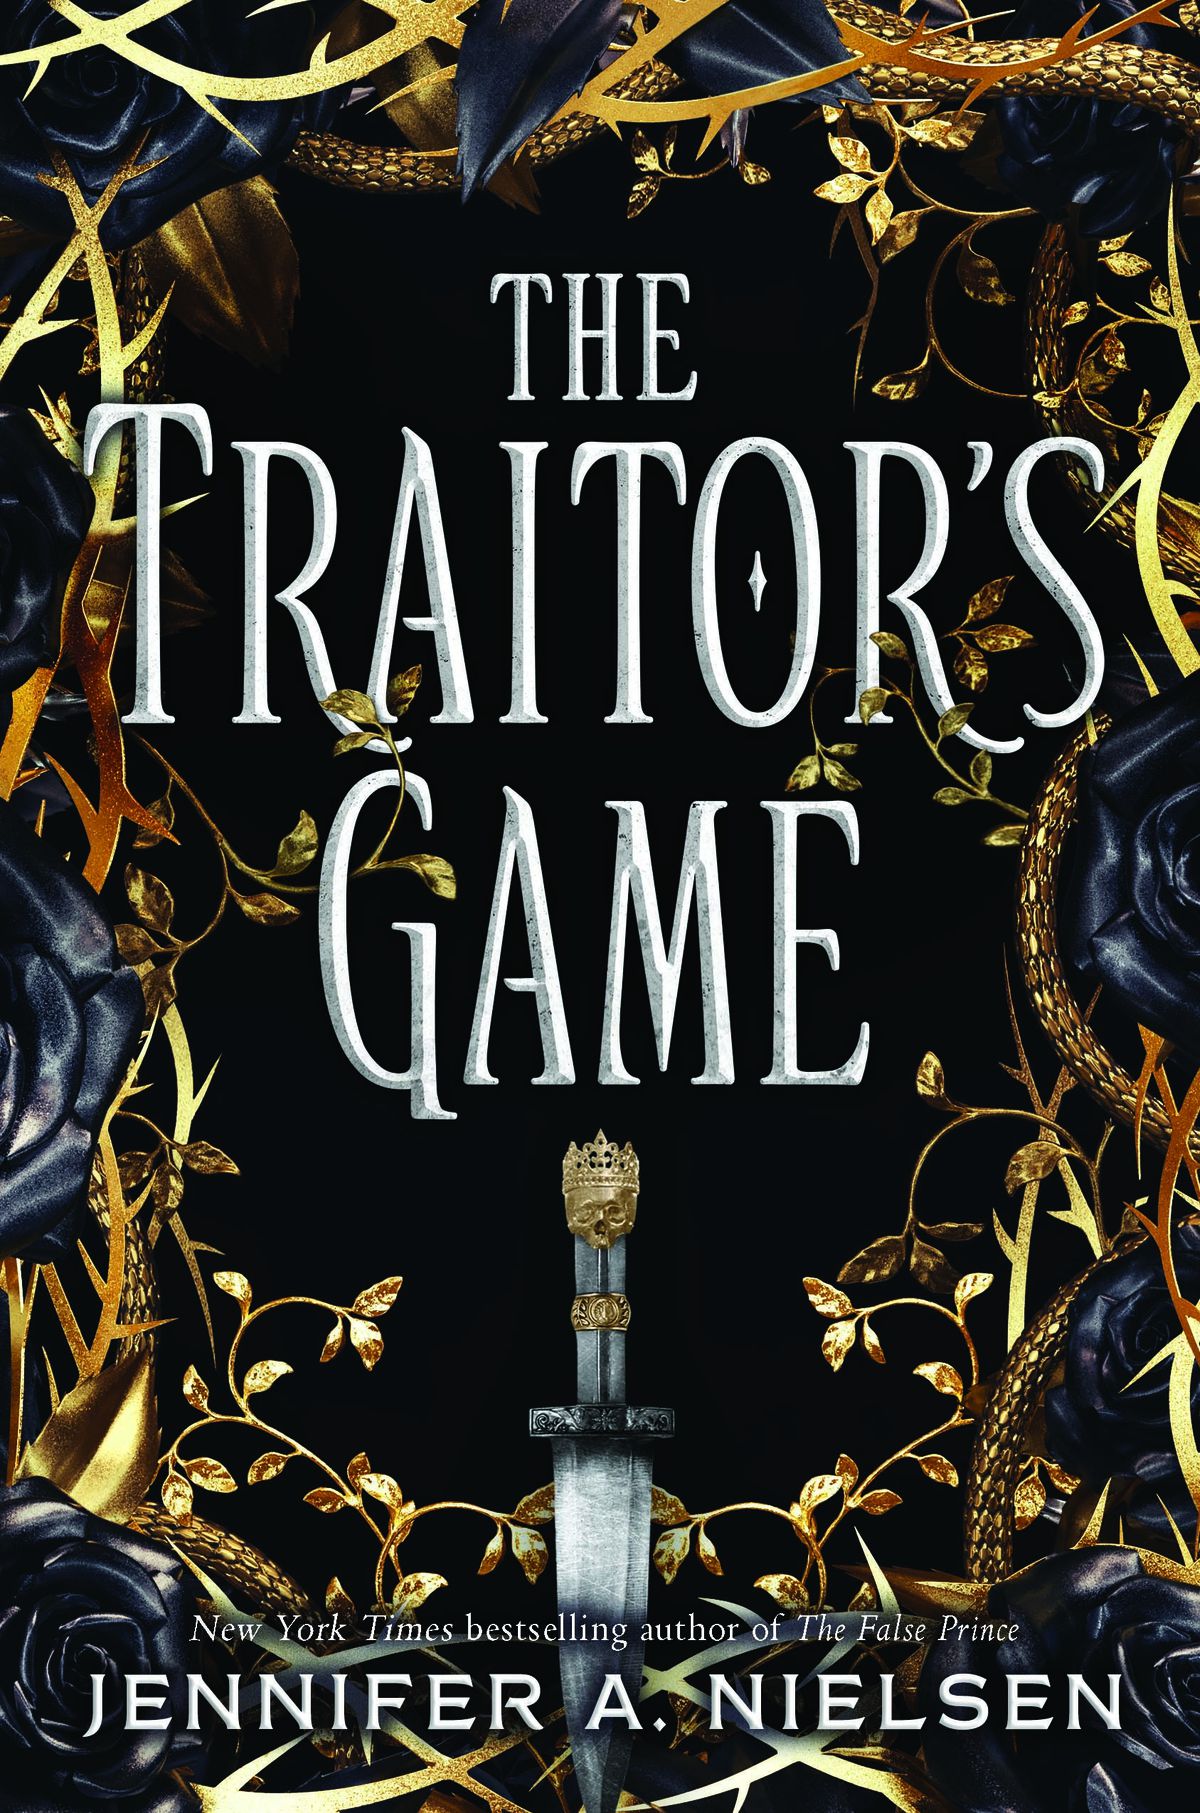 "The Traitor's Game" is by Jennifer A. Nielsen.